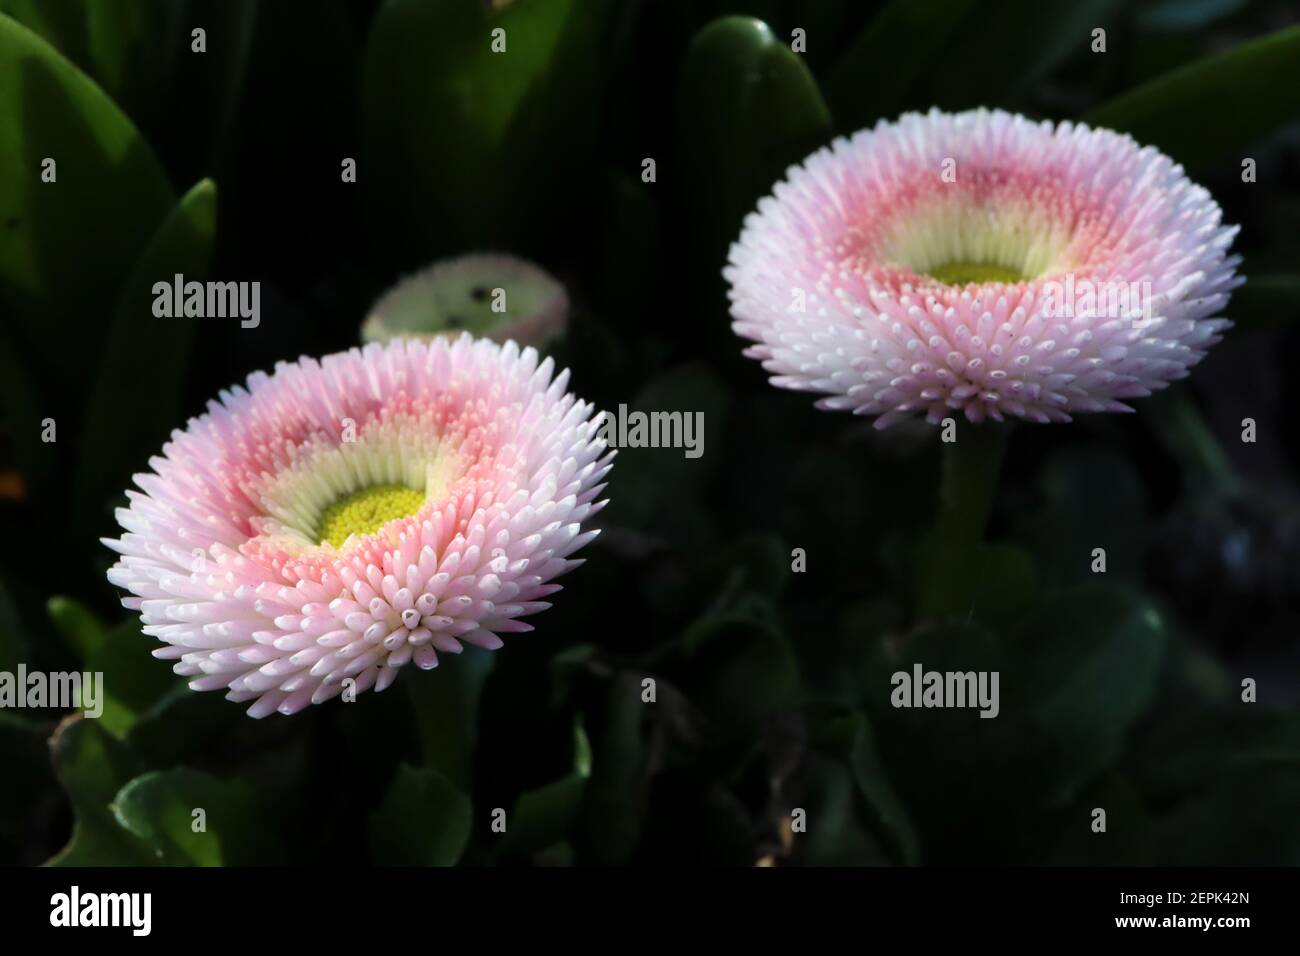 Bellis perennis pomponette ‘Bellissima Rose Bicolor’ Bellis bicolor – pink and white round flowers with tightly quilled petals, February, England, UK Stock Photo